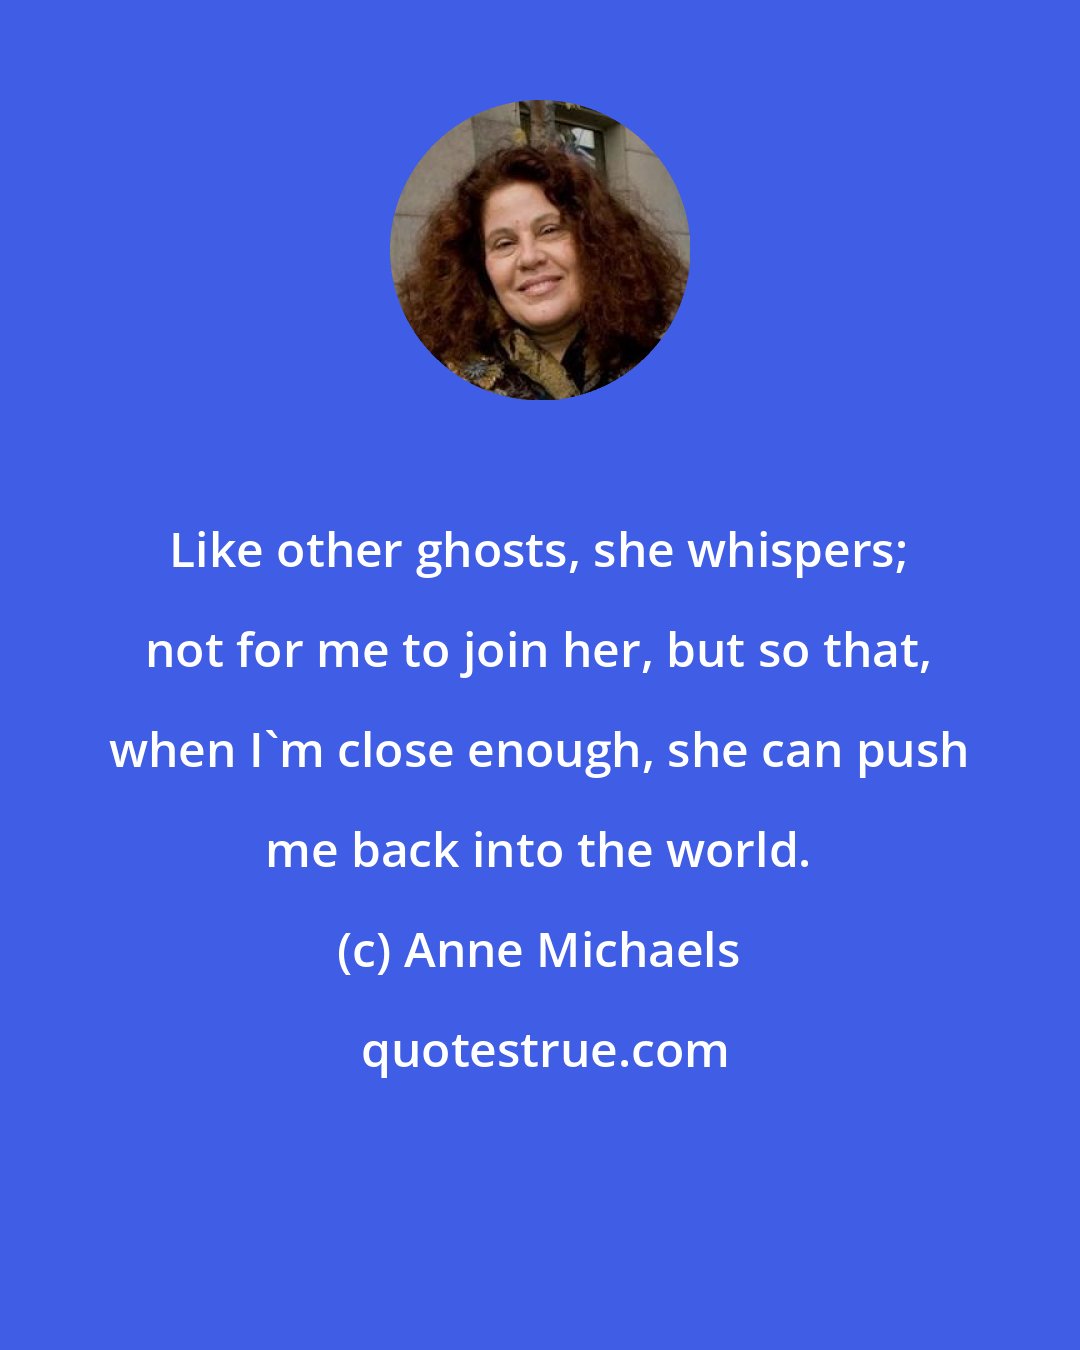 Anne Michaels: Like other ghosts, she whispers; not for me to join her, but so that, when I'm close enough, she can push me back into the world.